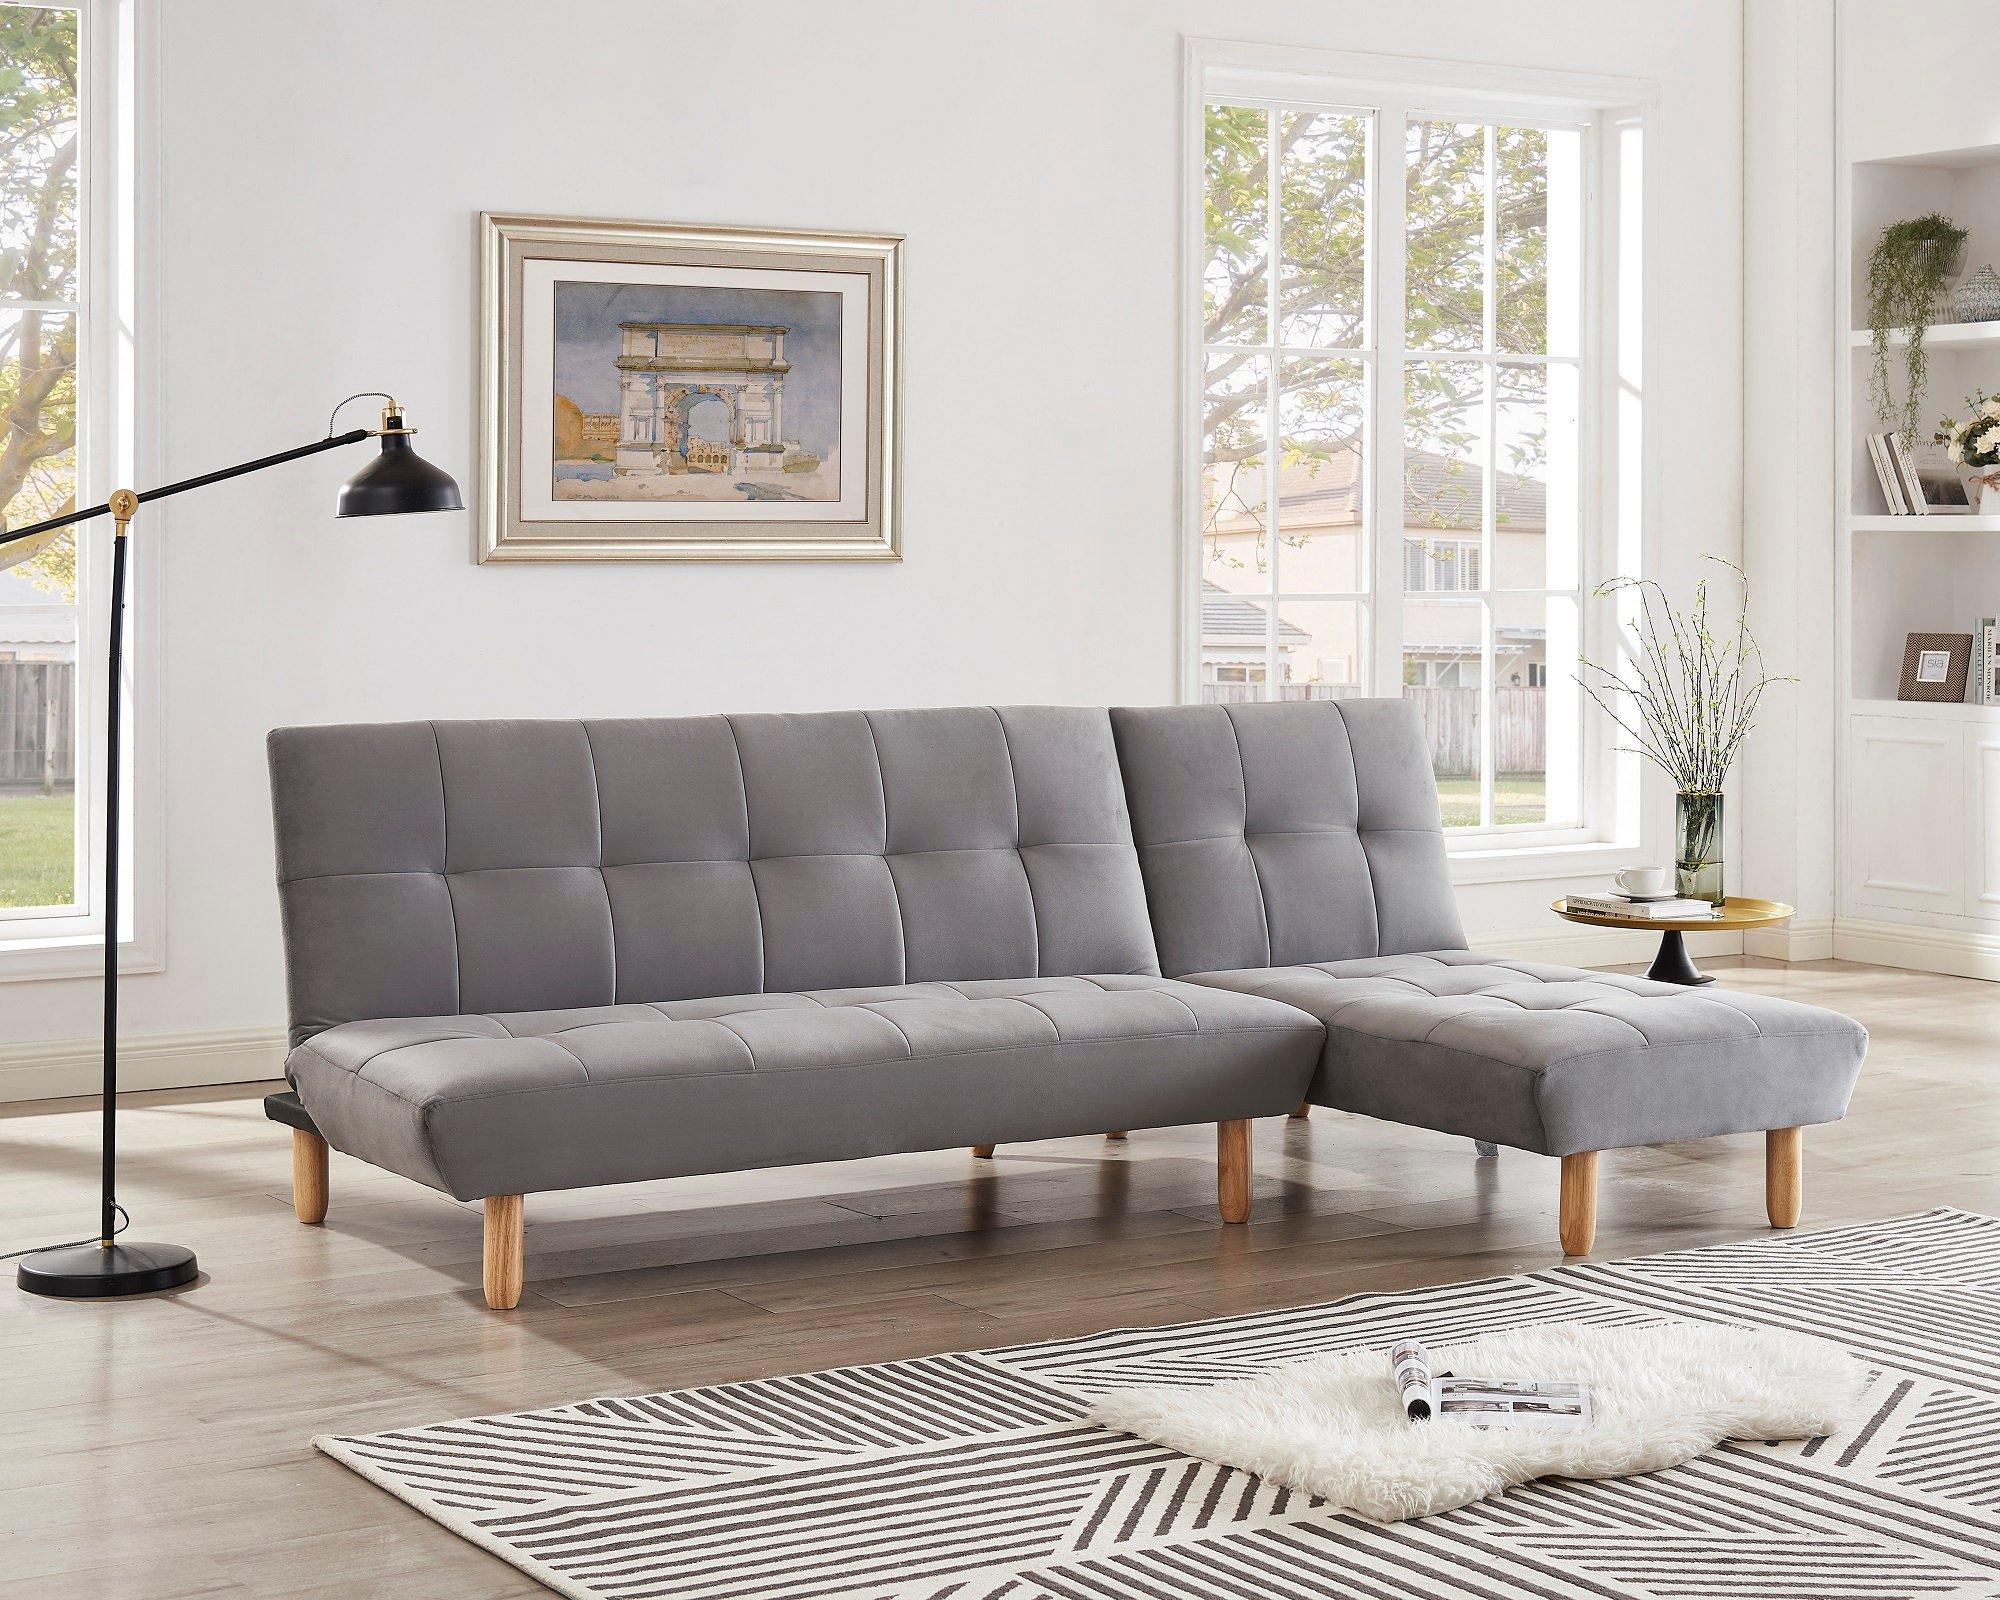 Morgan L-Shaped Sofa Bed With Tufted Fabric and Chaise Section and Wooden Legs